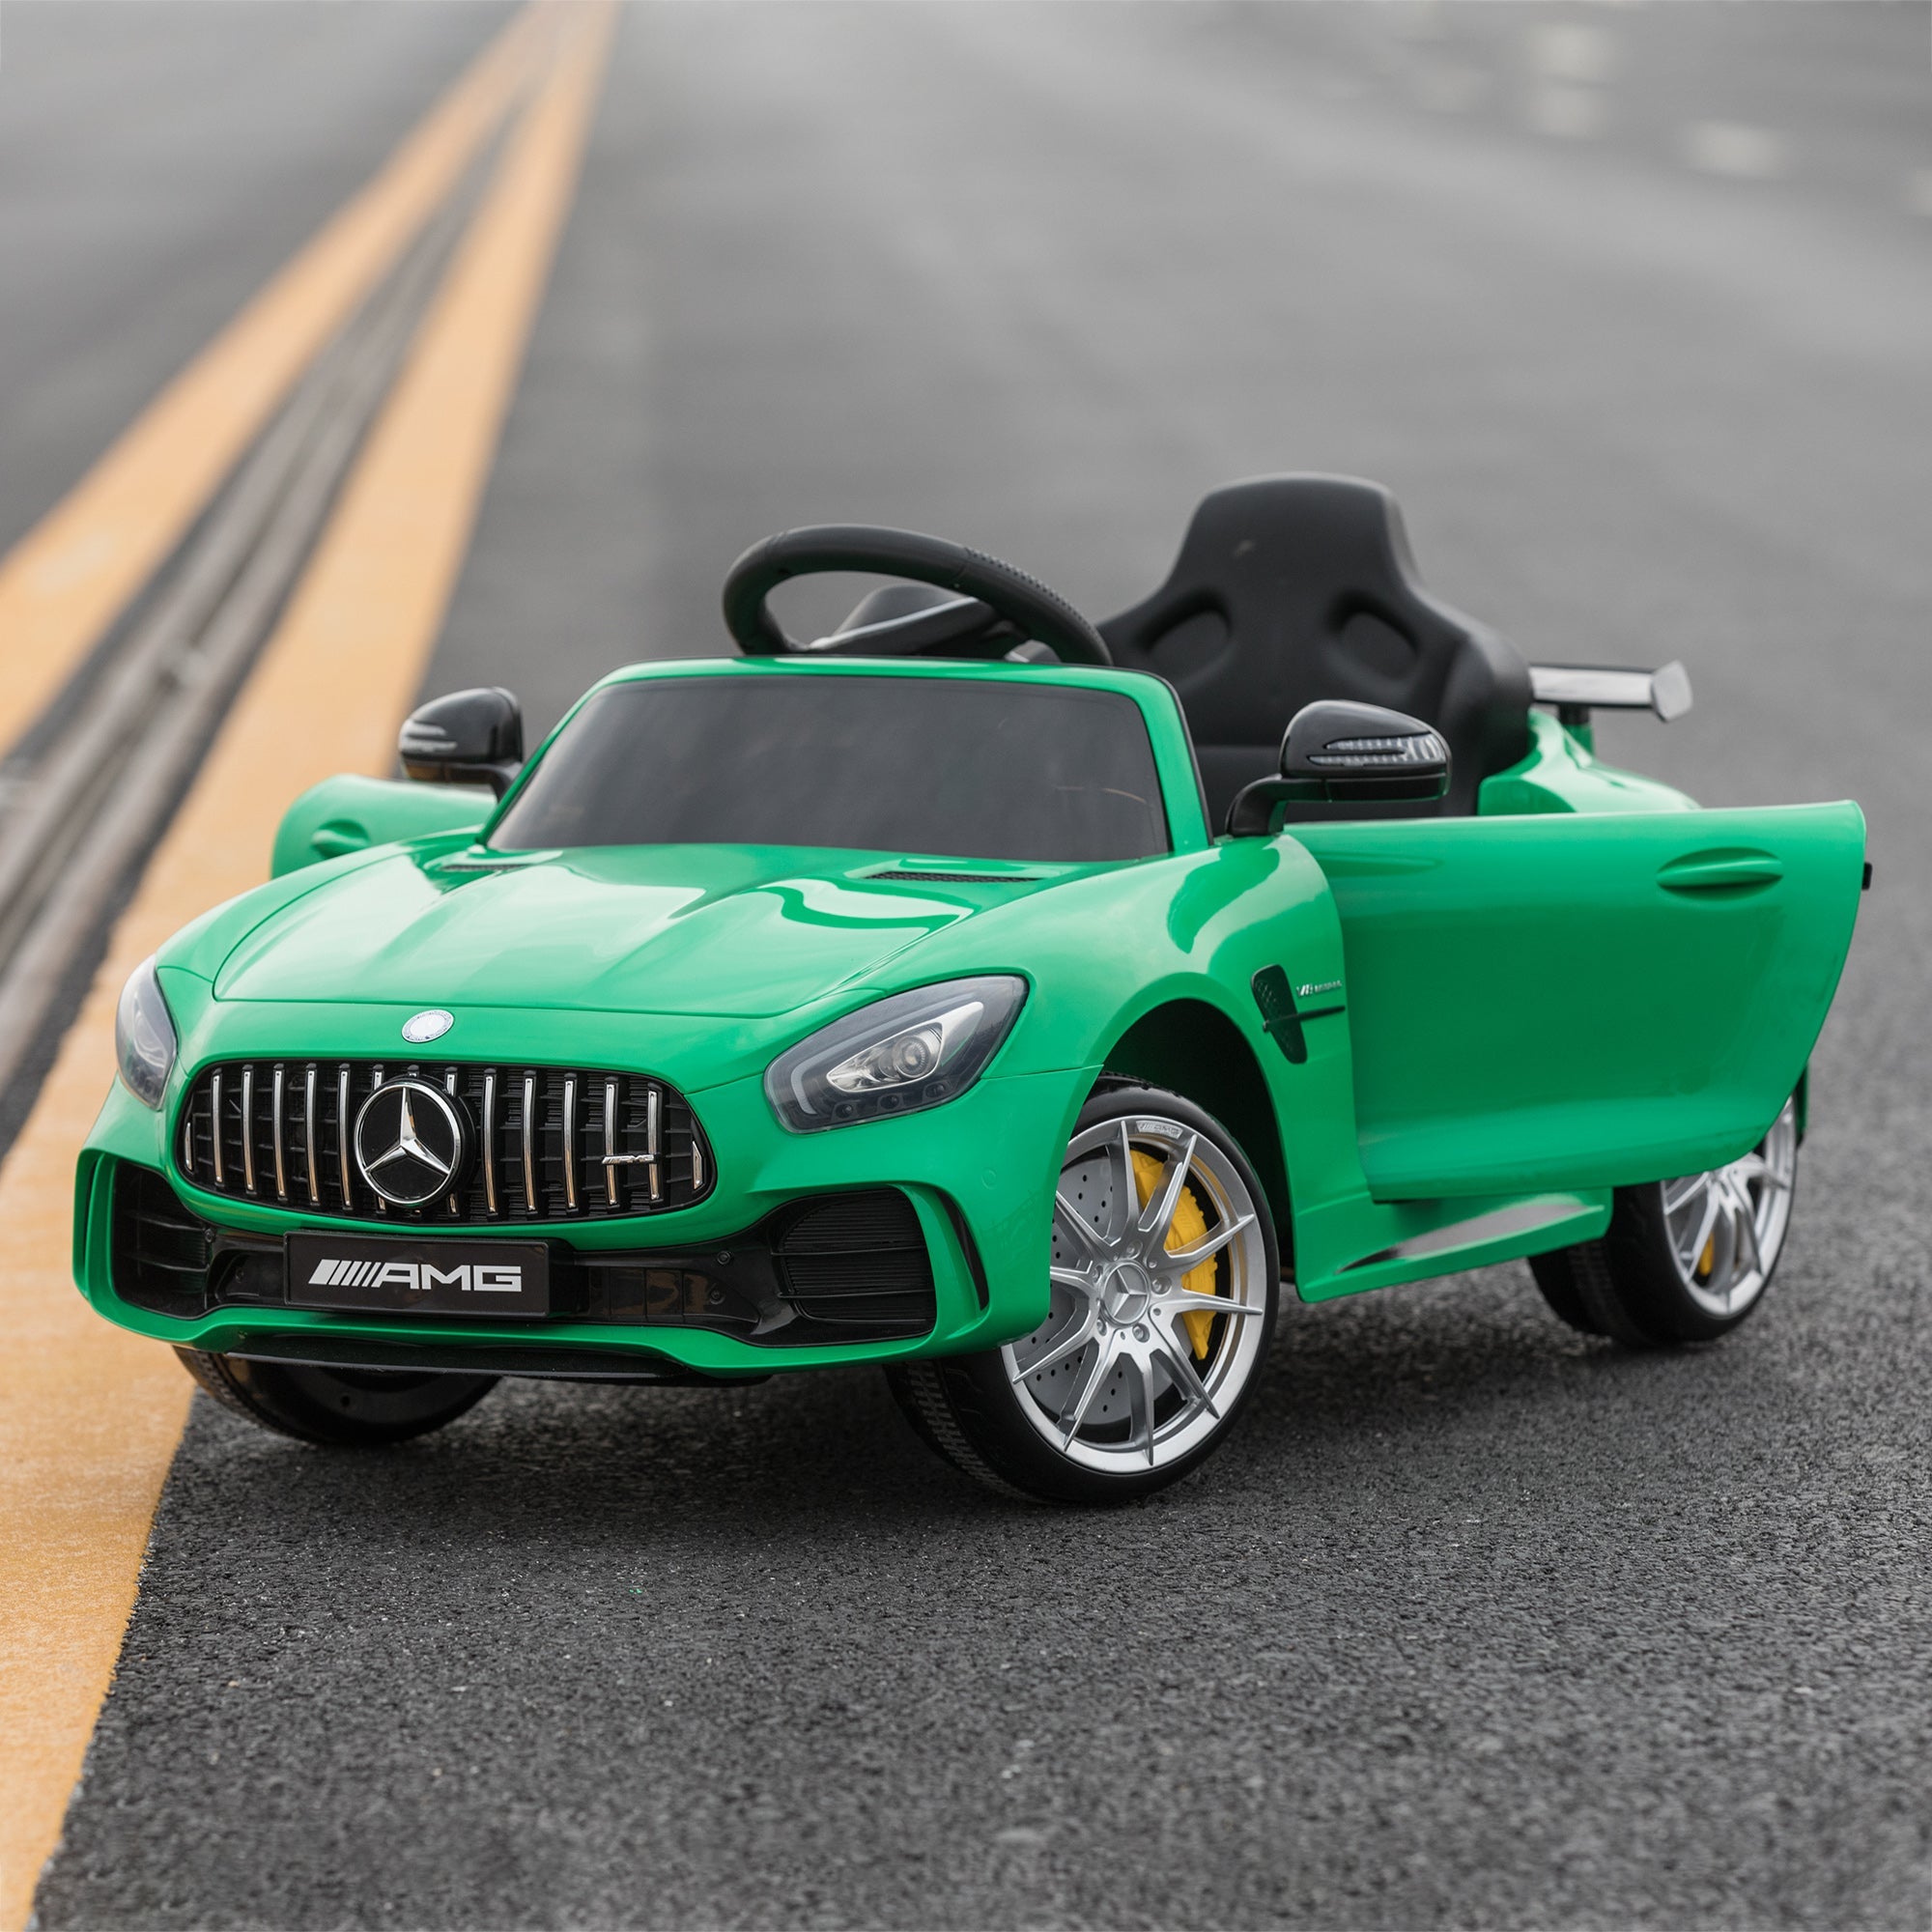 Maplin Plus Mercedes-Benz GTR 12V Kids Electric Ride-On Car with Remote Control - maplin.co.uk